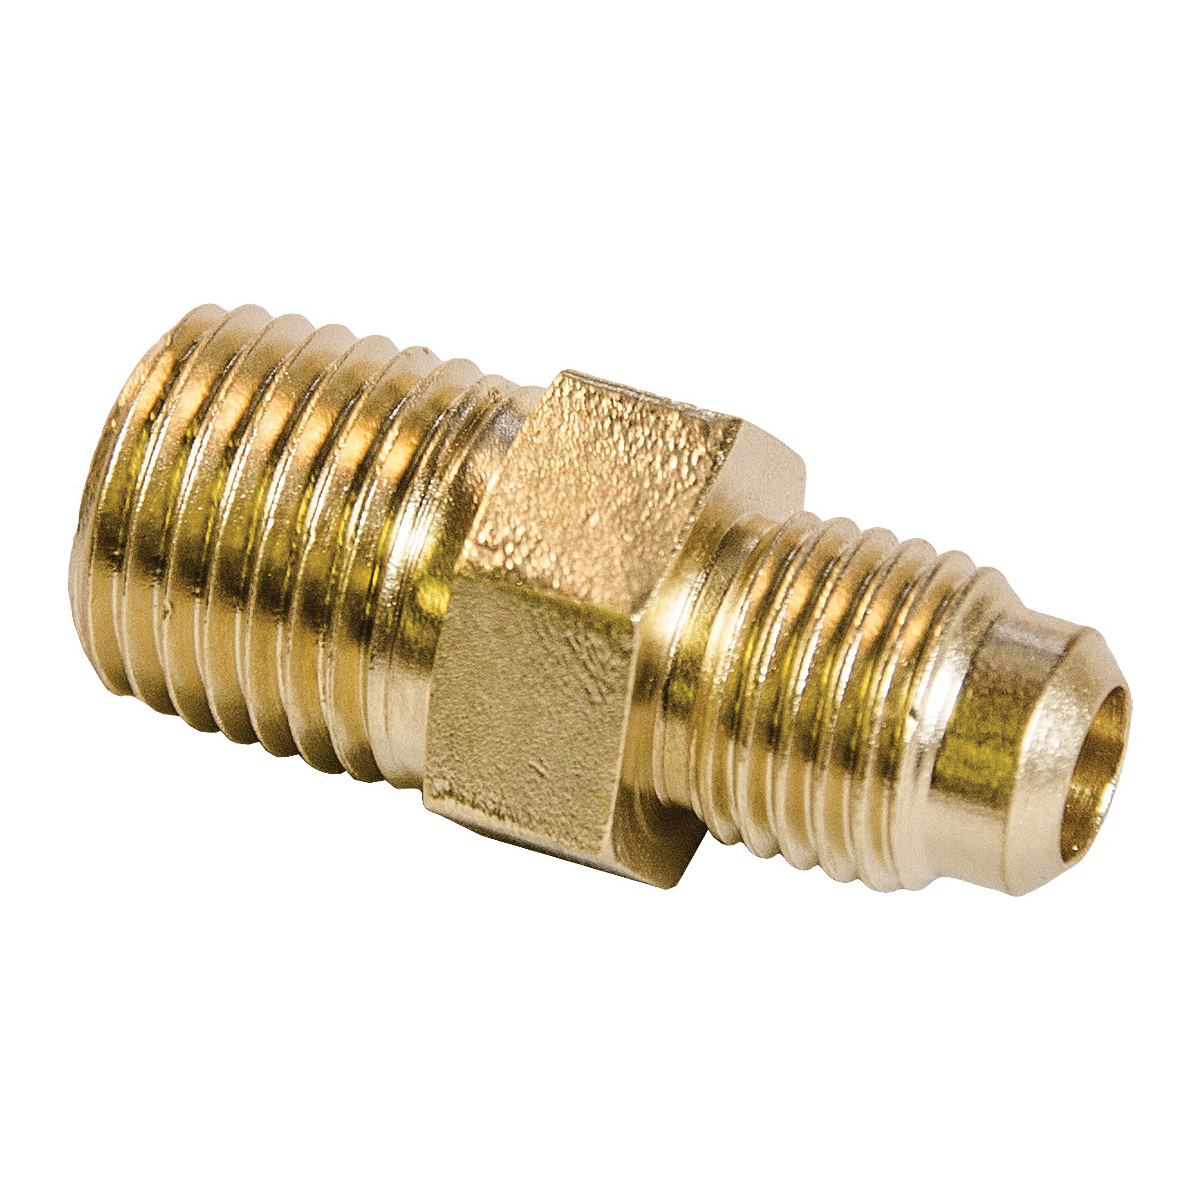 C&D Valve CD1414 Half Union, 1/4 in, Male Flared x MPT Connection, Brass